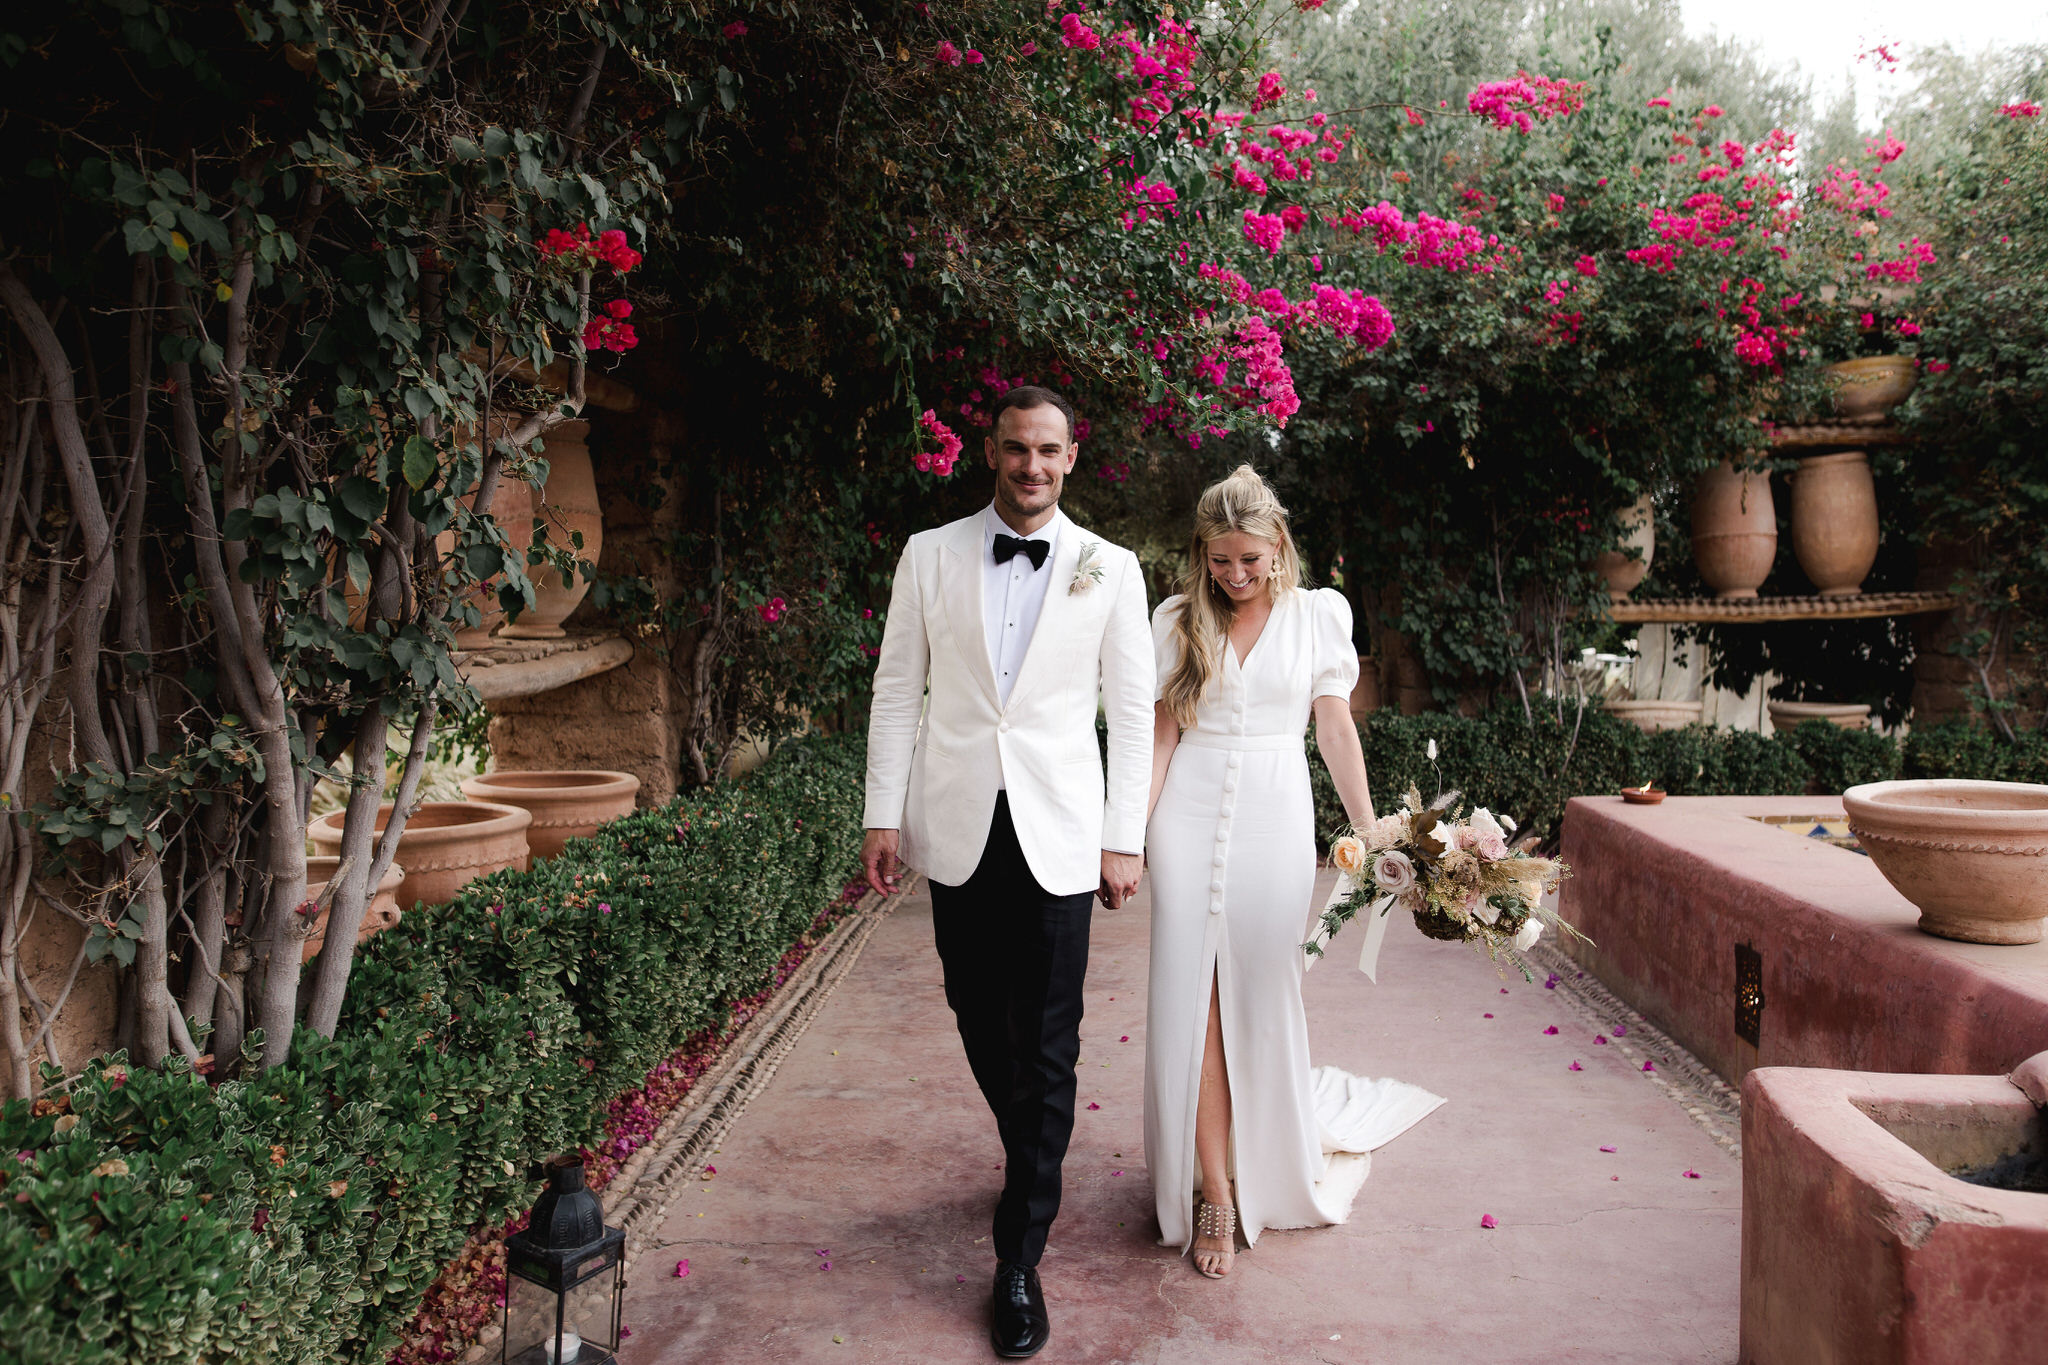 This Couple's Wedding Featured an Intimate Brunch and Pool Party